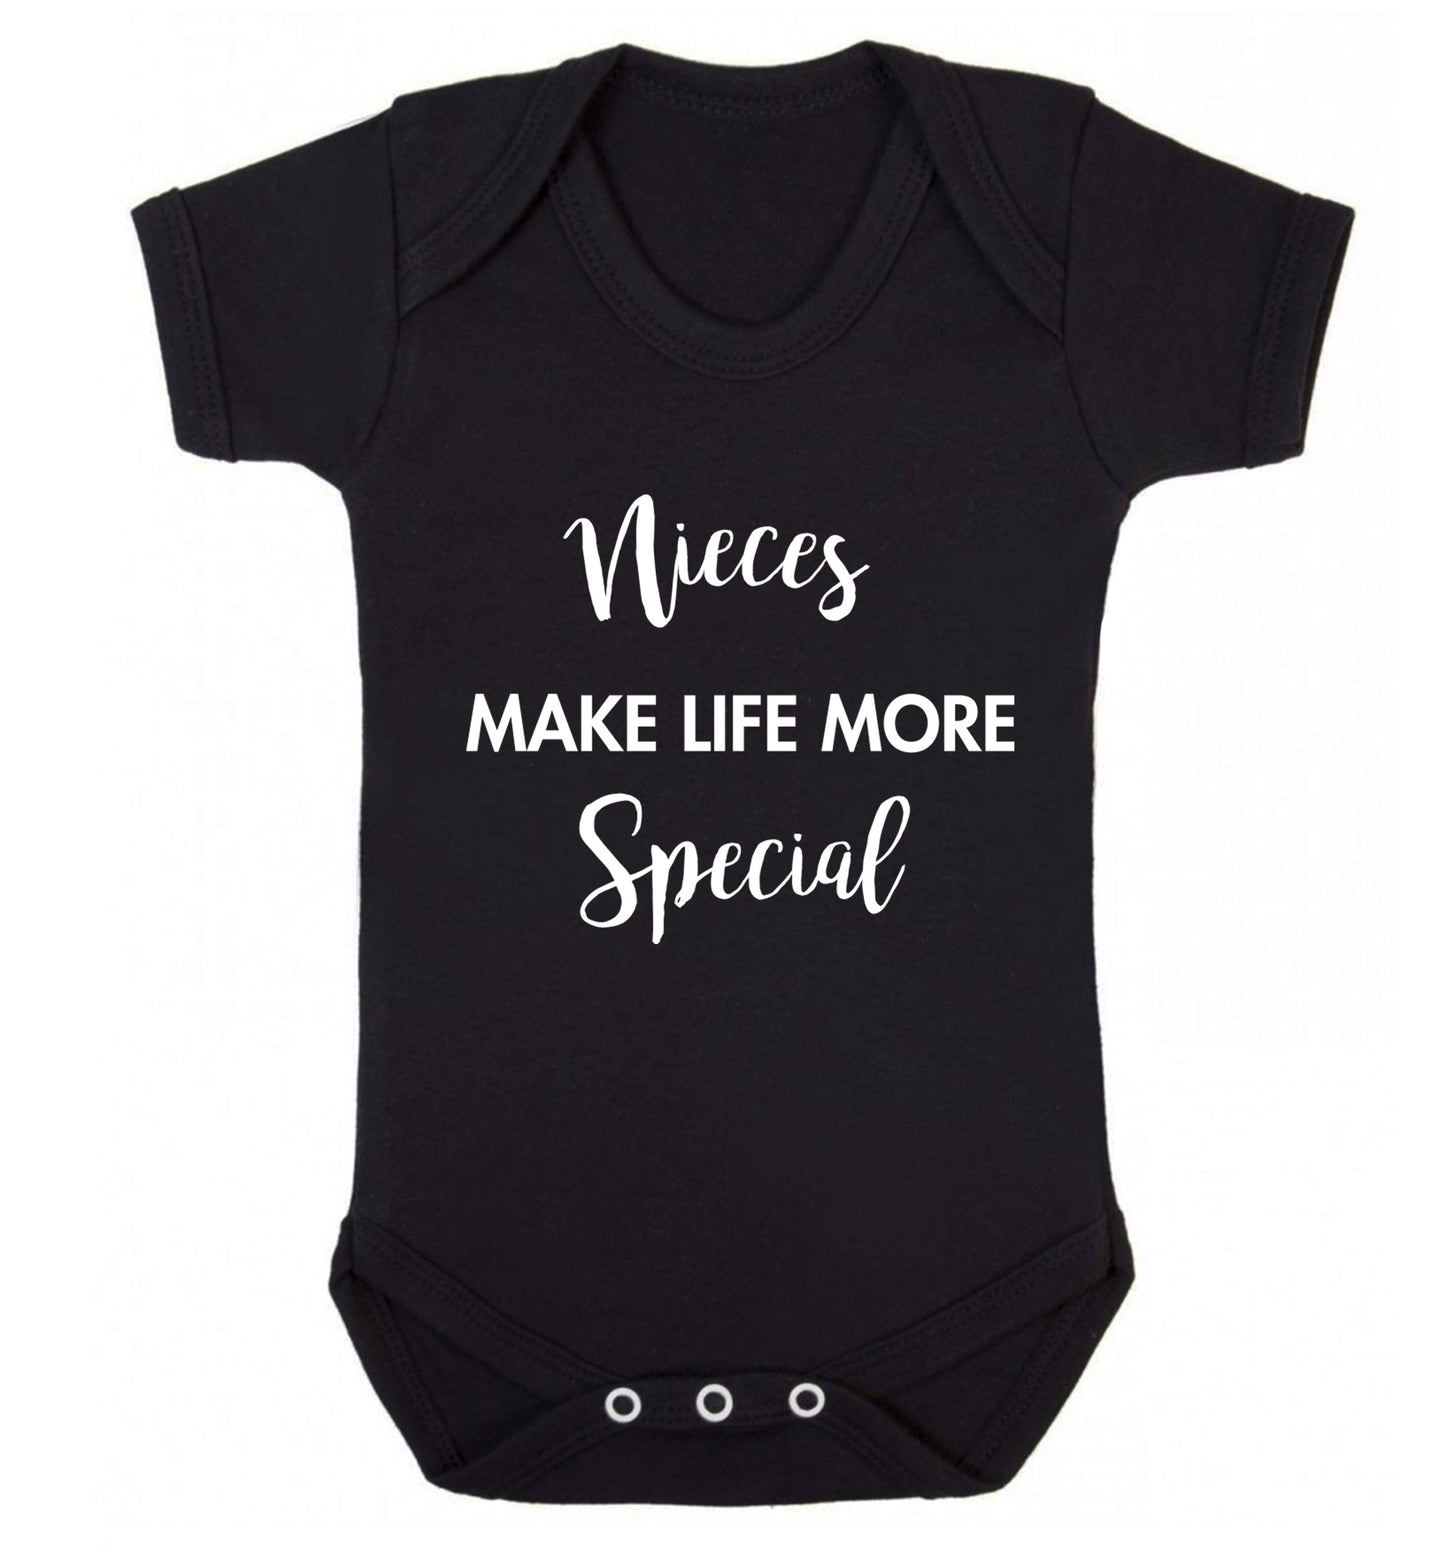 Nieces make life more special Baby Vest black 18-24 months